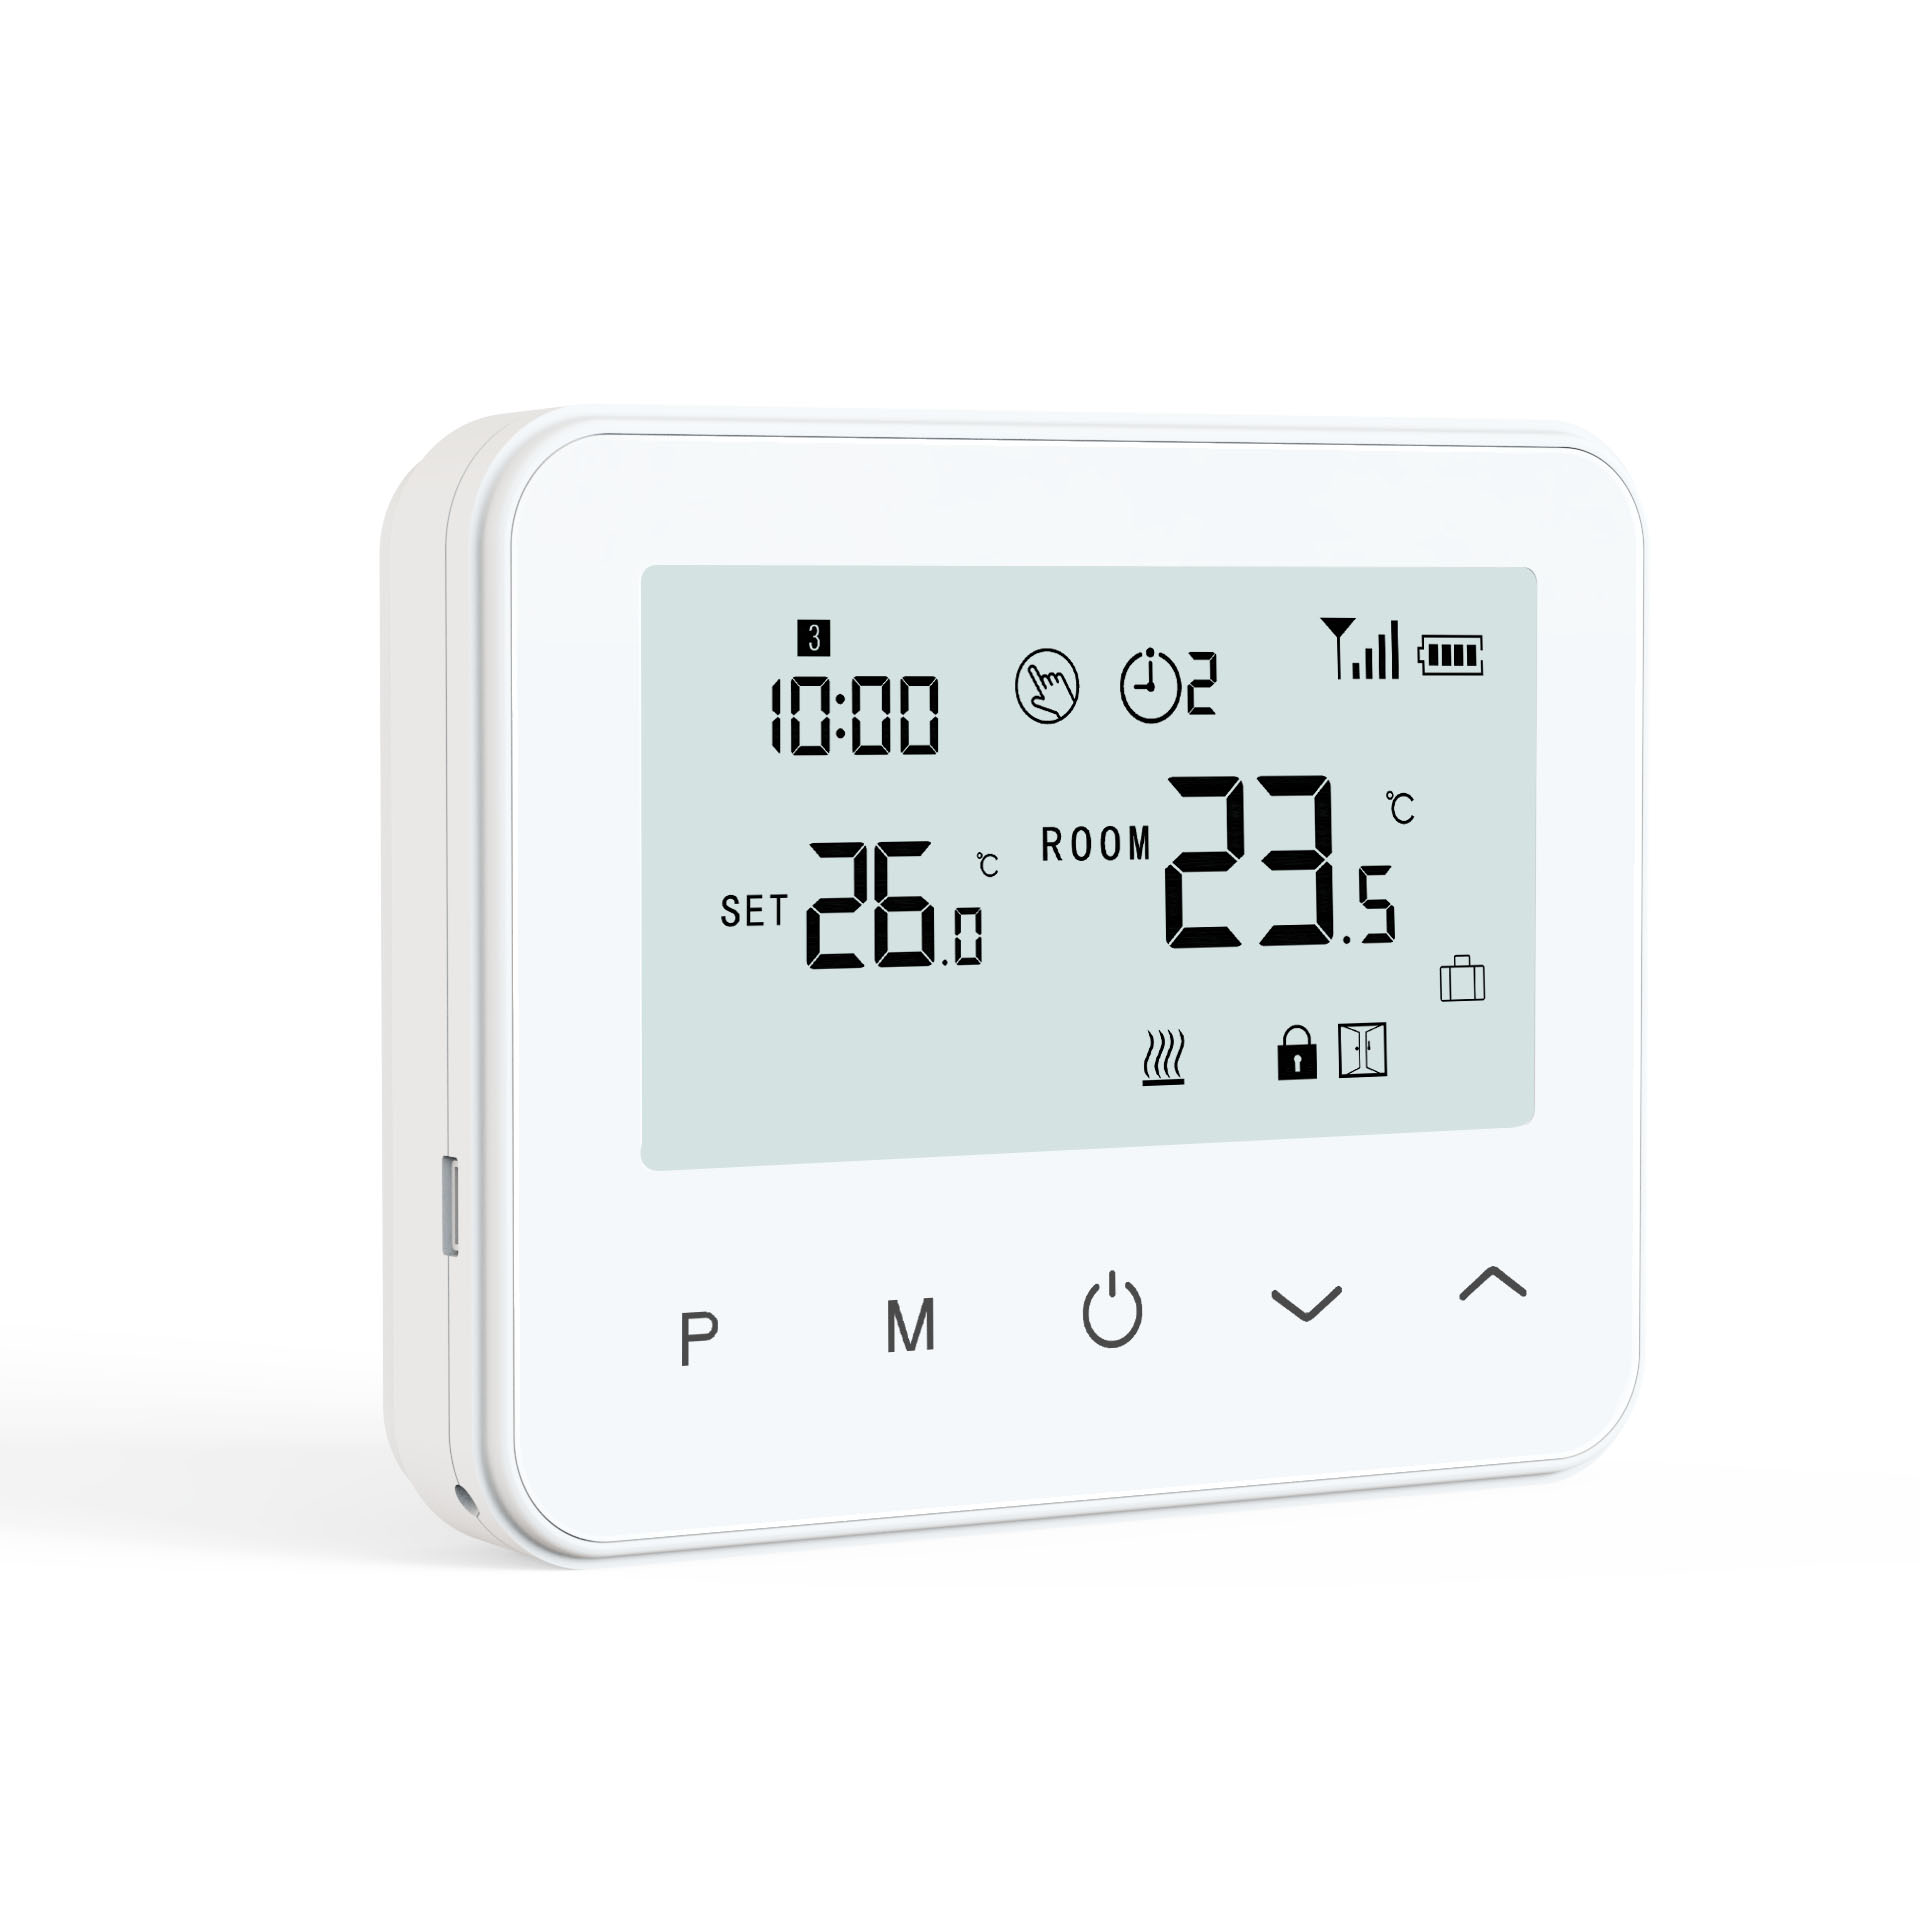 Large LCD Screen RF868/433mhz Wireless Gas Heating Room Thermostat for Heating and Life Water